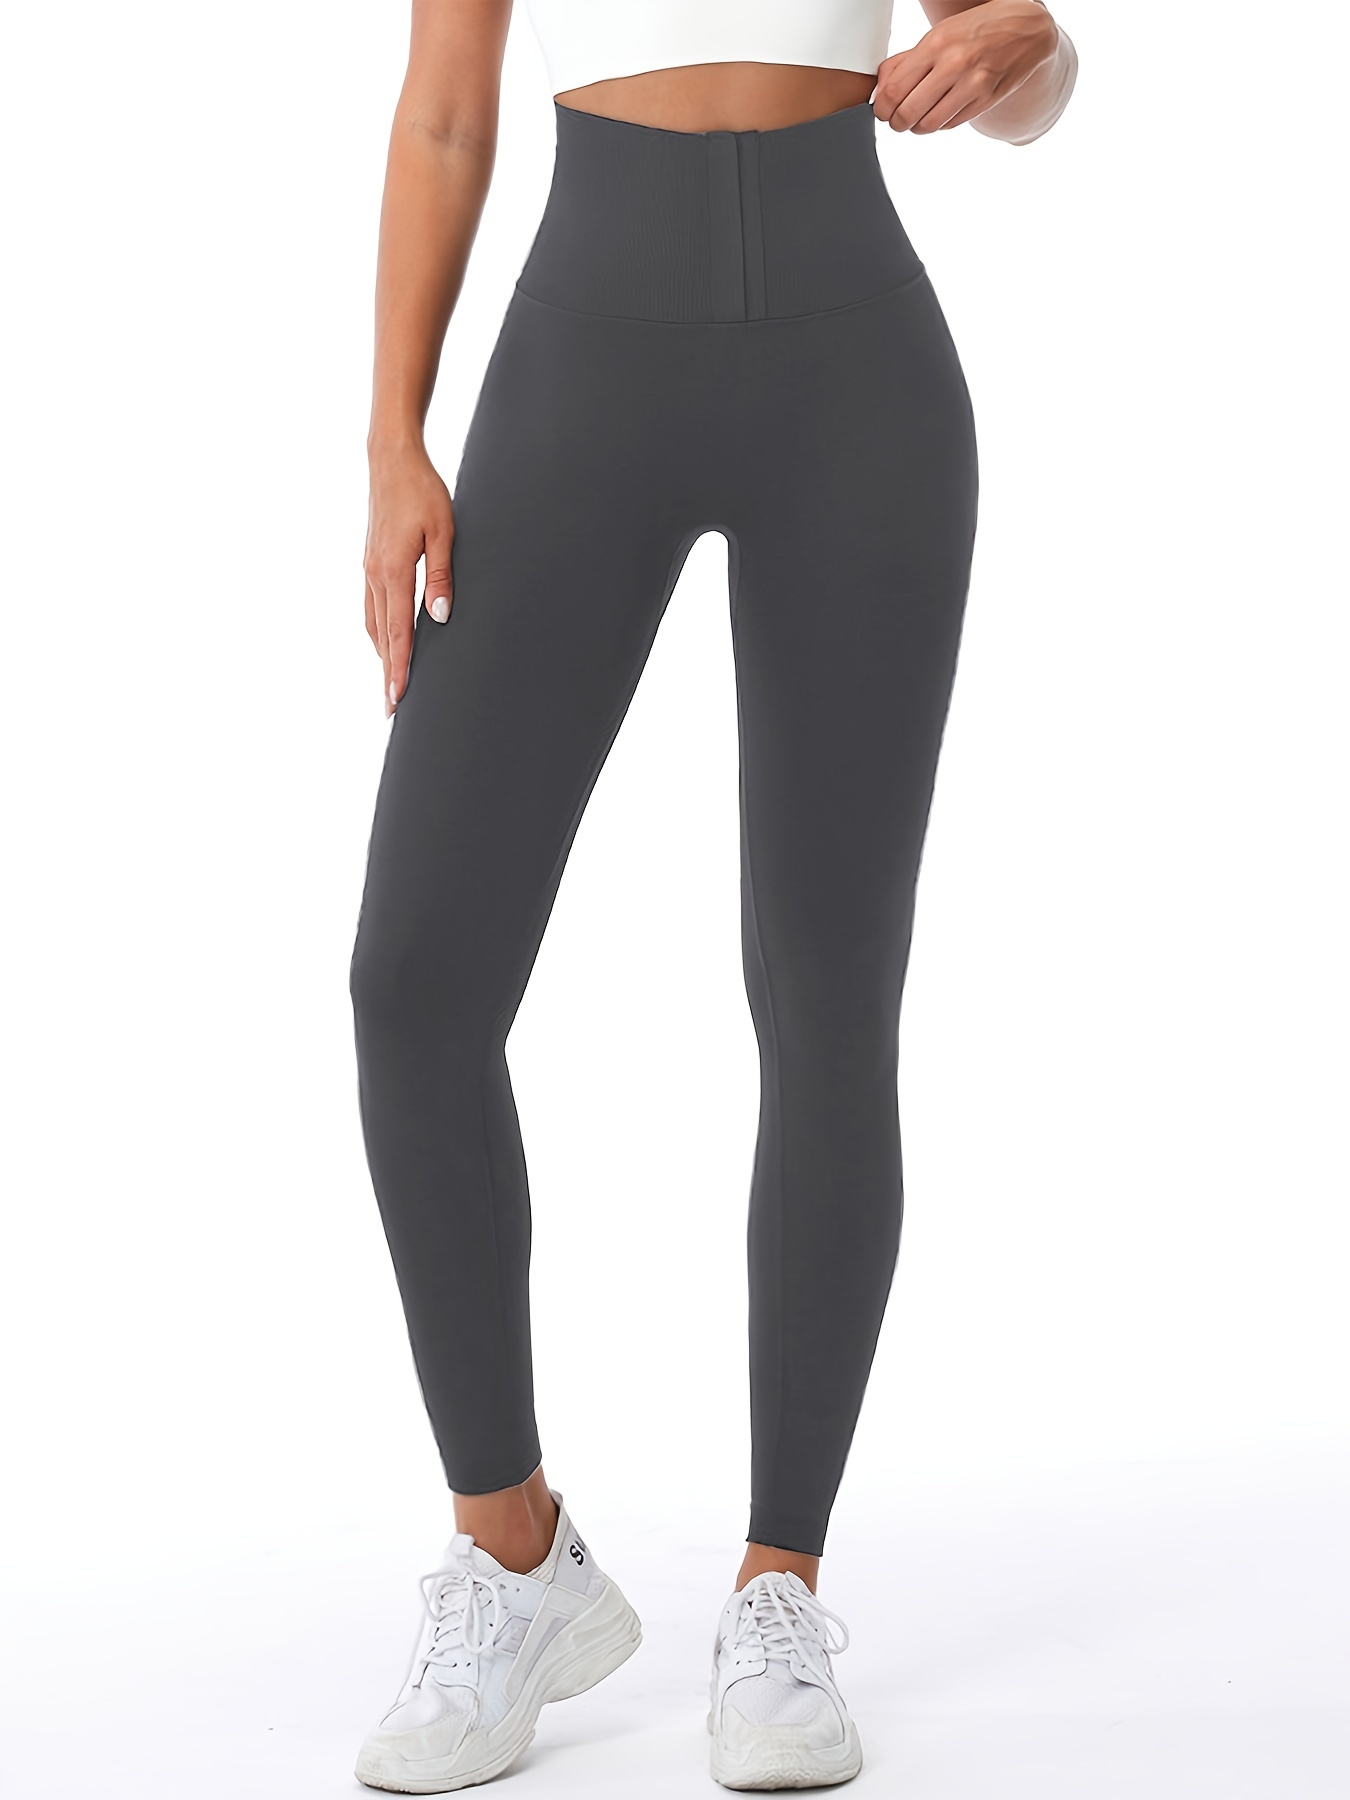 Fitness Apparel  Grey leggings outfit, Outfits with leggings, Outfits